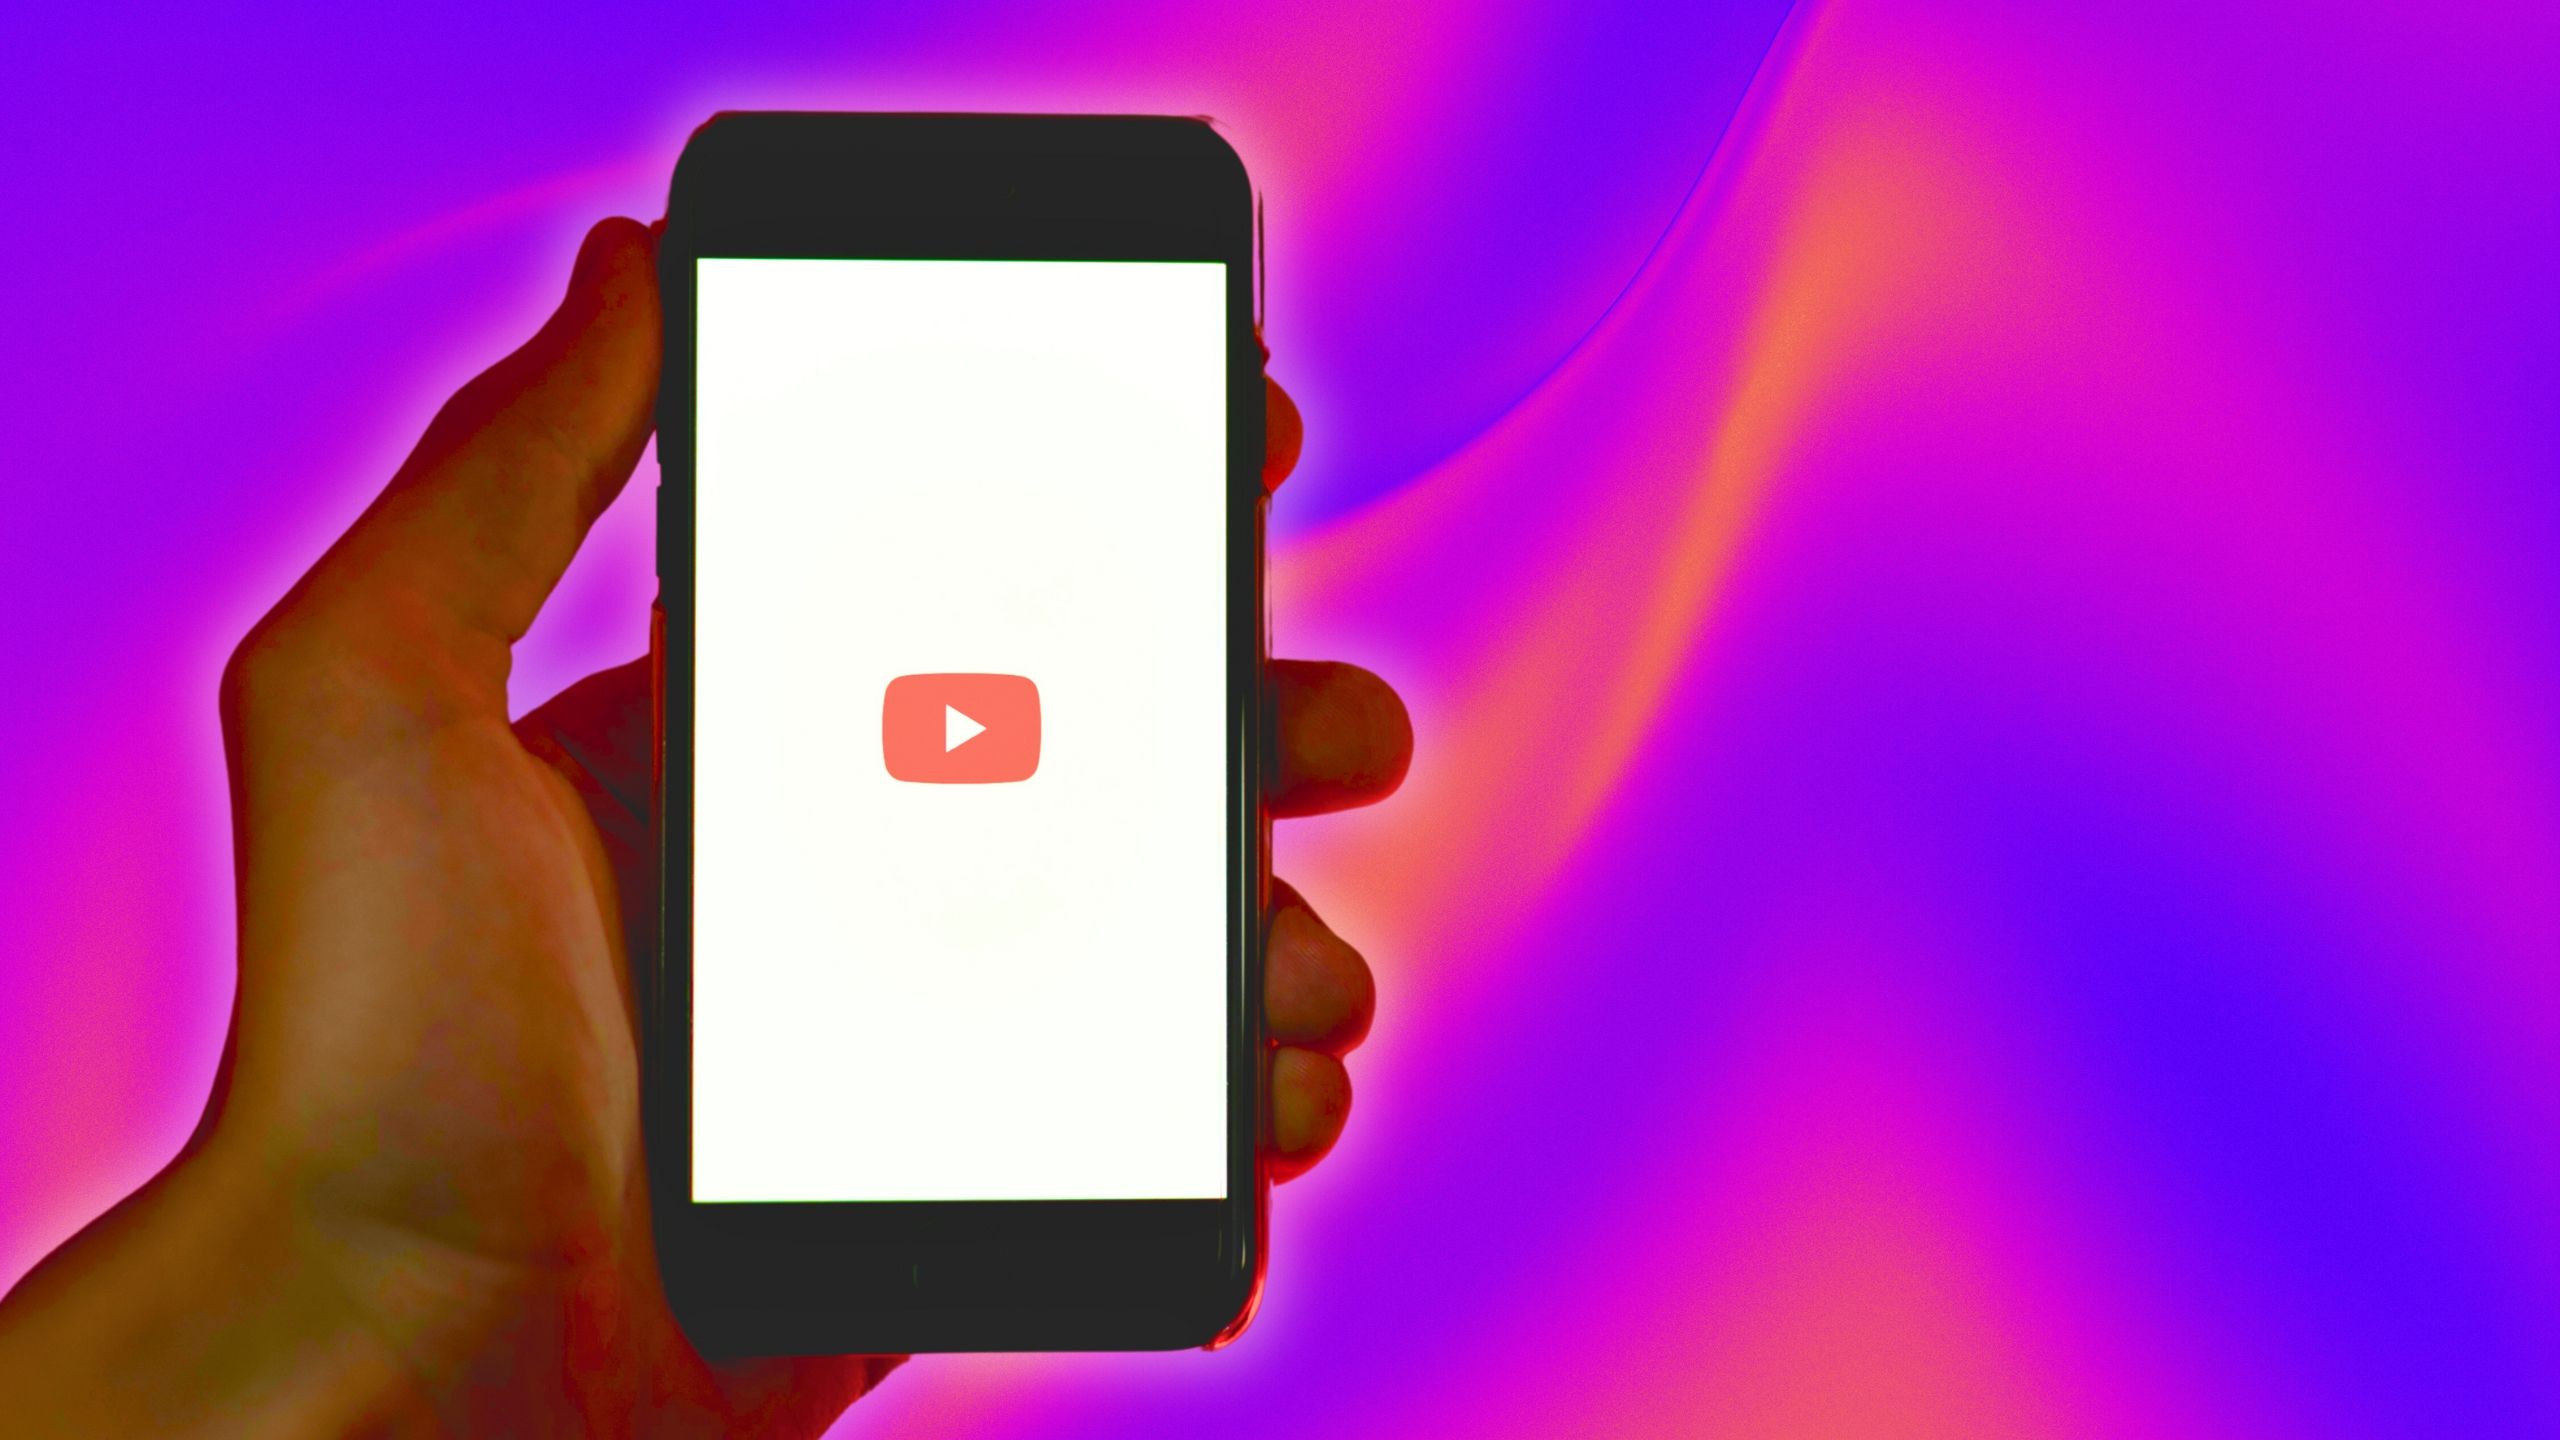 YouTube on a hand-held iPhone against a pink and purple background. 